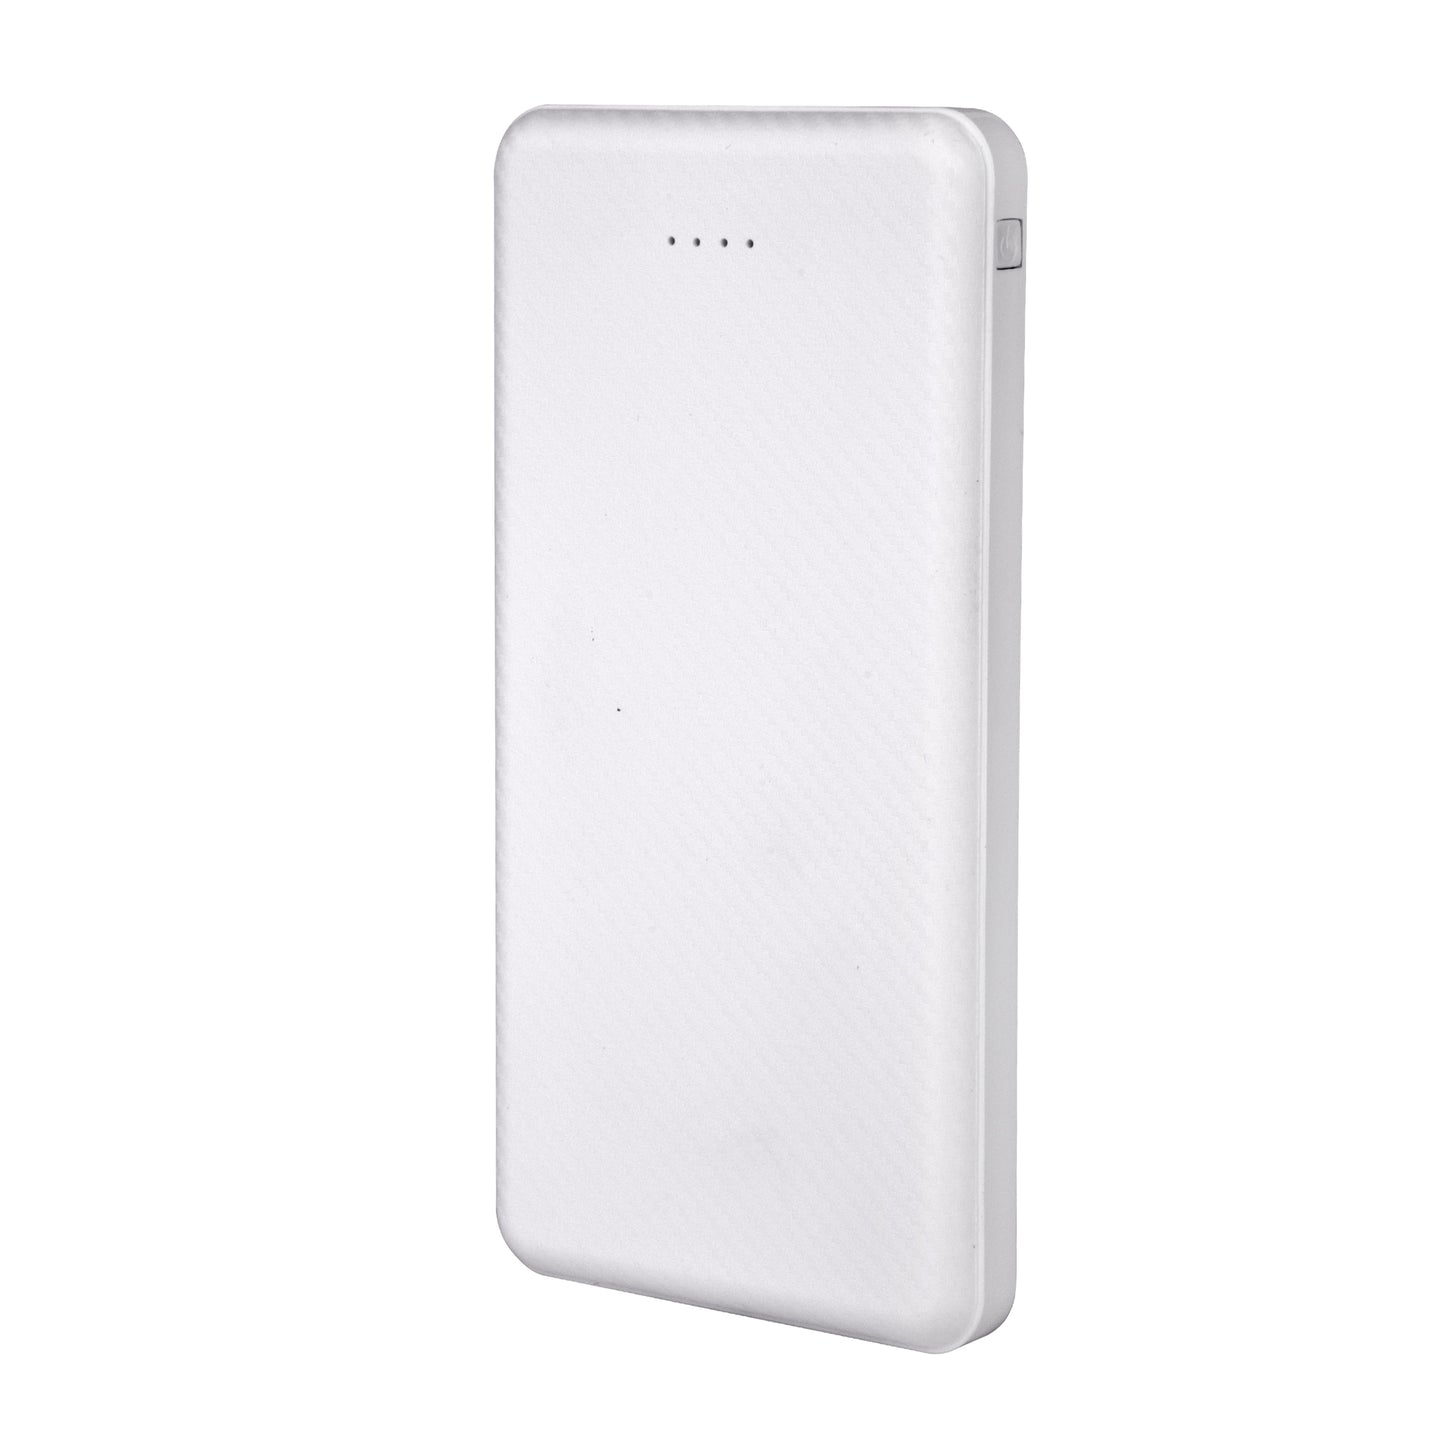 Personalized White 10000mAh Power Bank - For Corporate Gifting, Event Gifting, Freebies, Promotions - HK1216